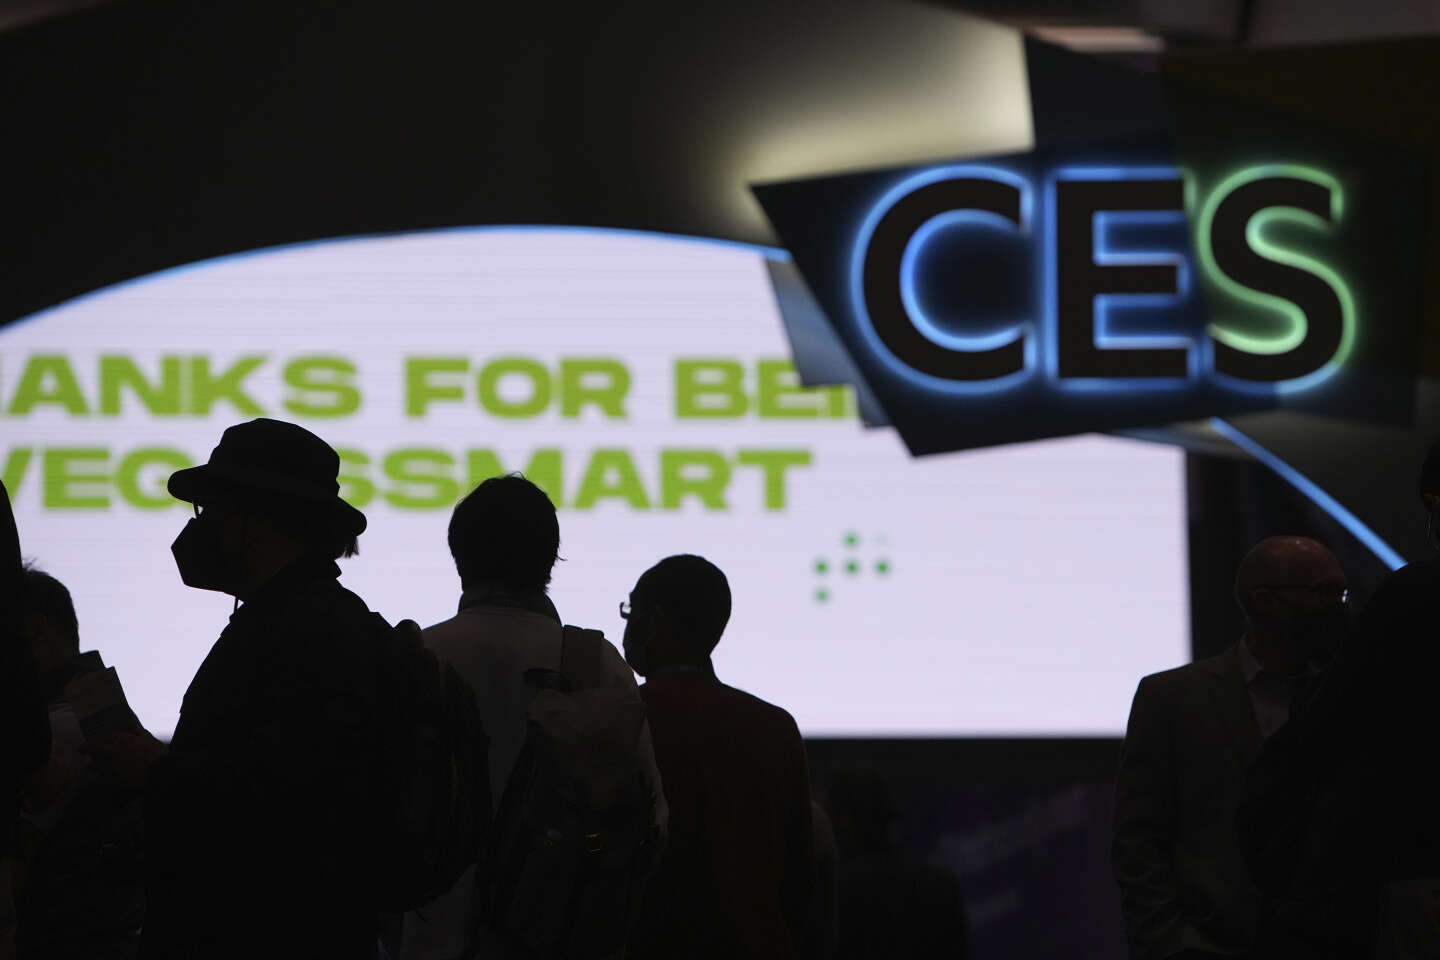 The CES in Las Vegas wants to get out of the all-gadget